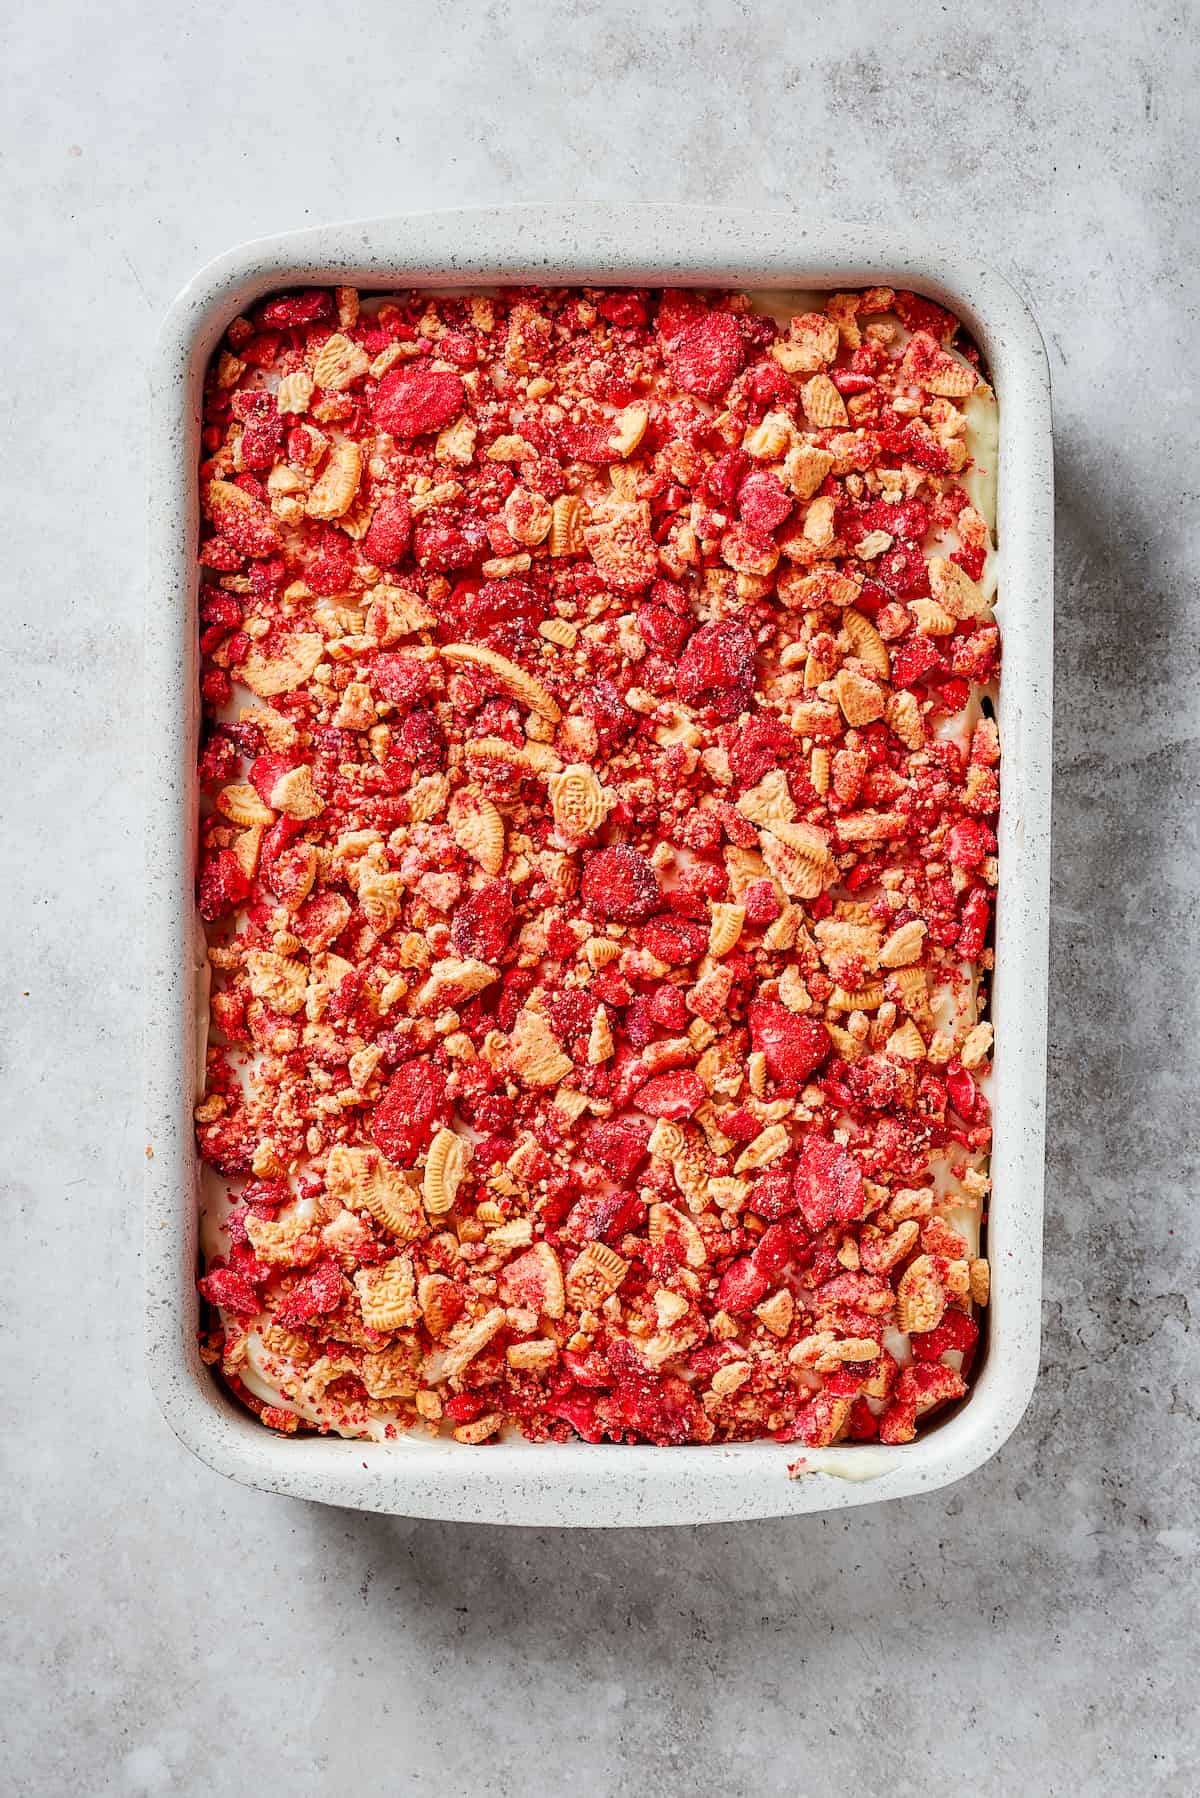 A finished strawberry crunch cake is shown in a pan.